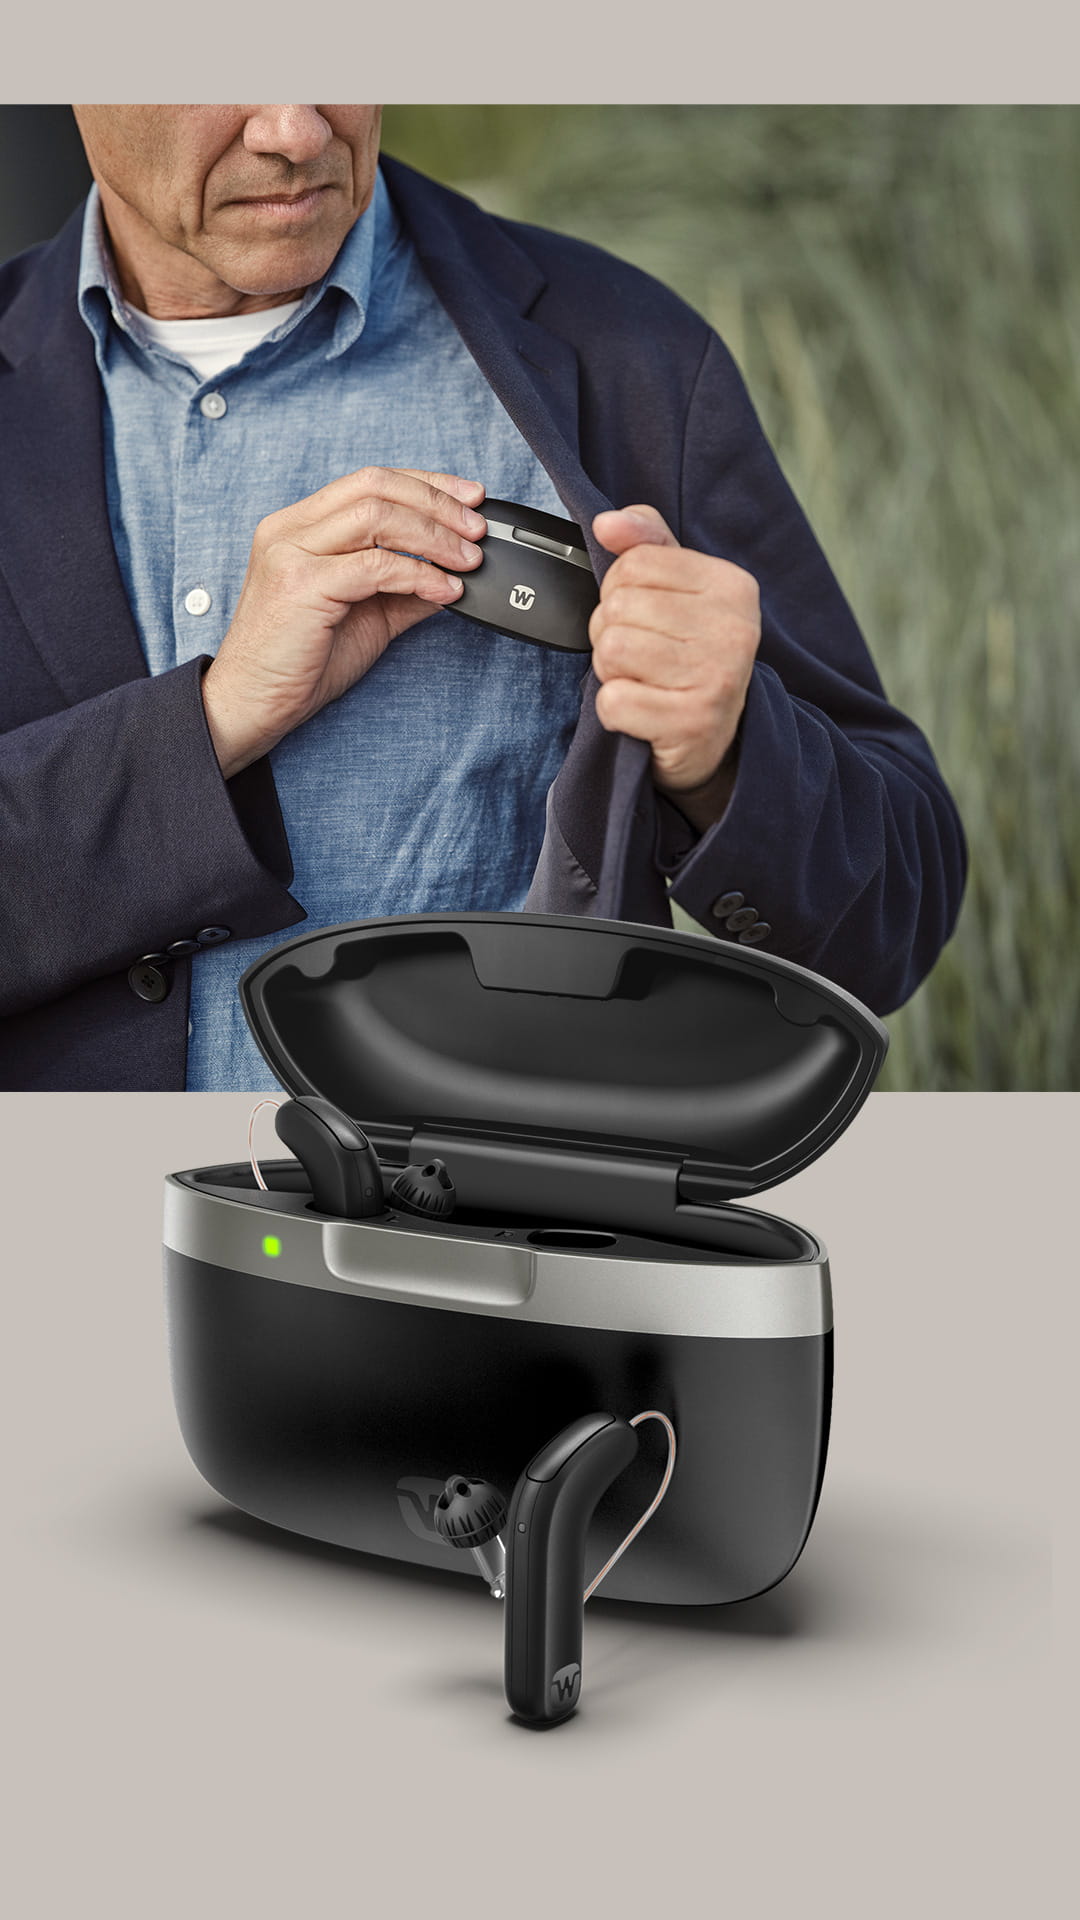 Man putting Widex portable hearing aid charger in his jacket pocket